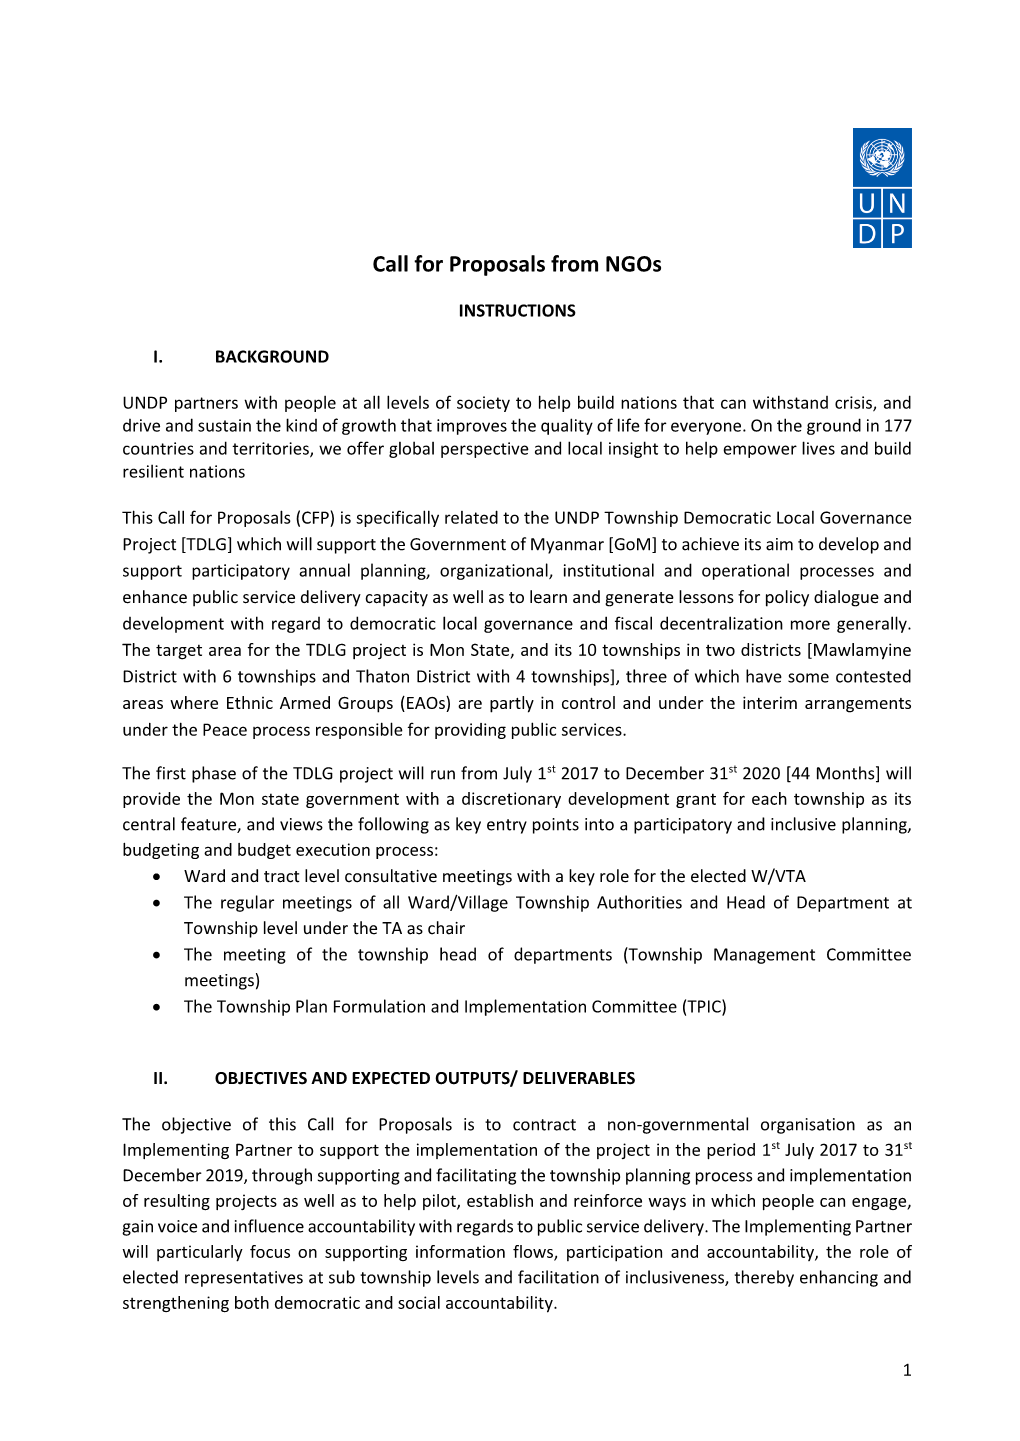 Call for Proposals from Ngos